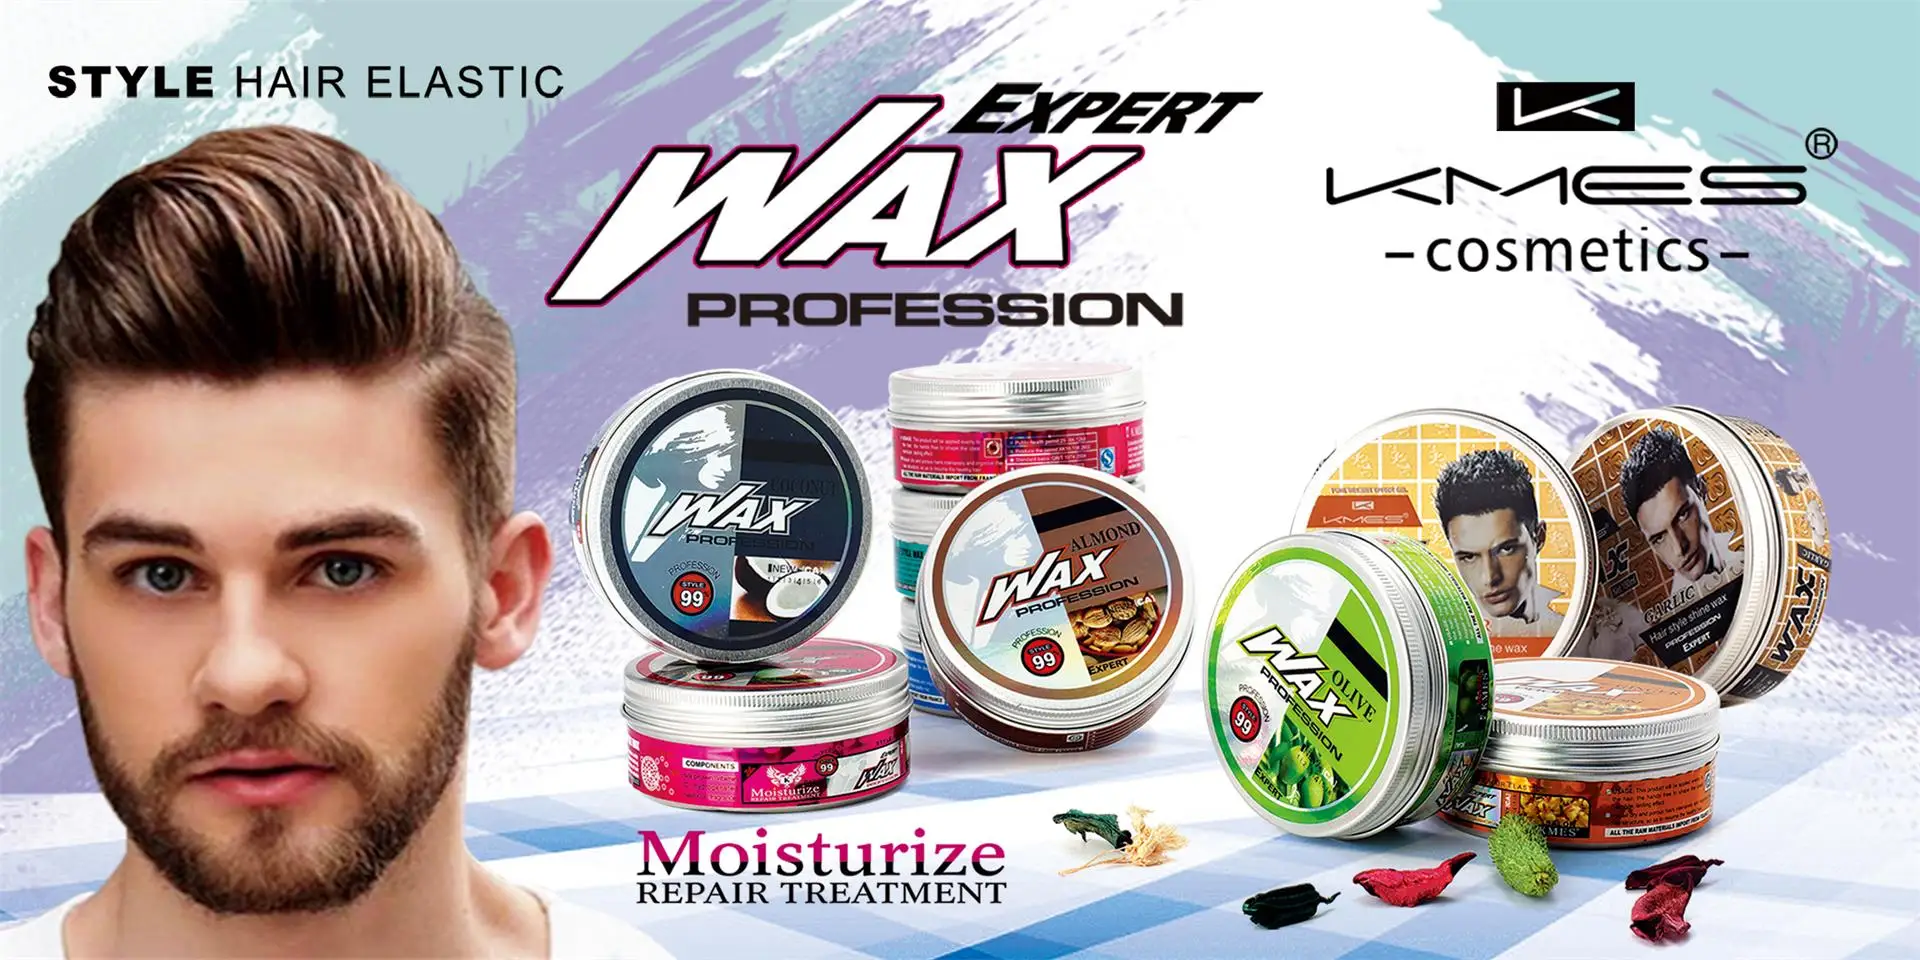 Gel Wax - Iconic Hair Products